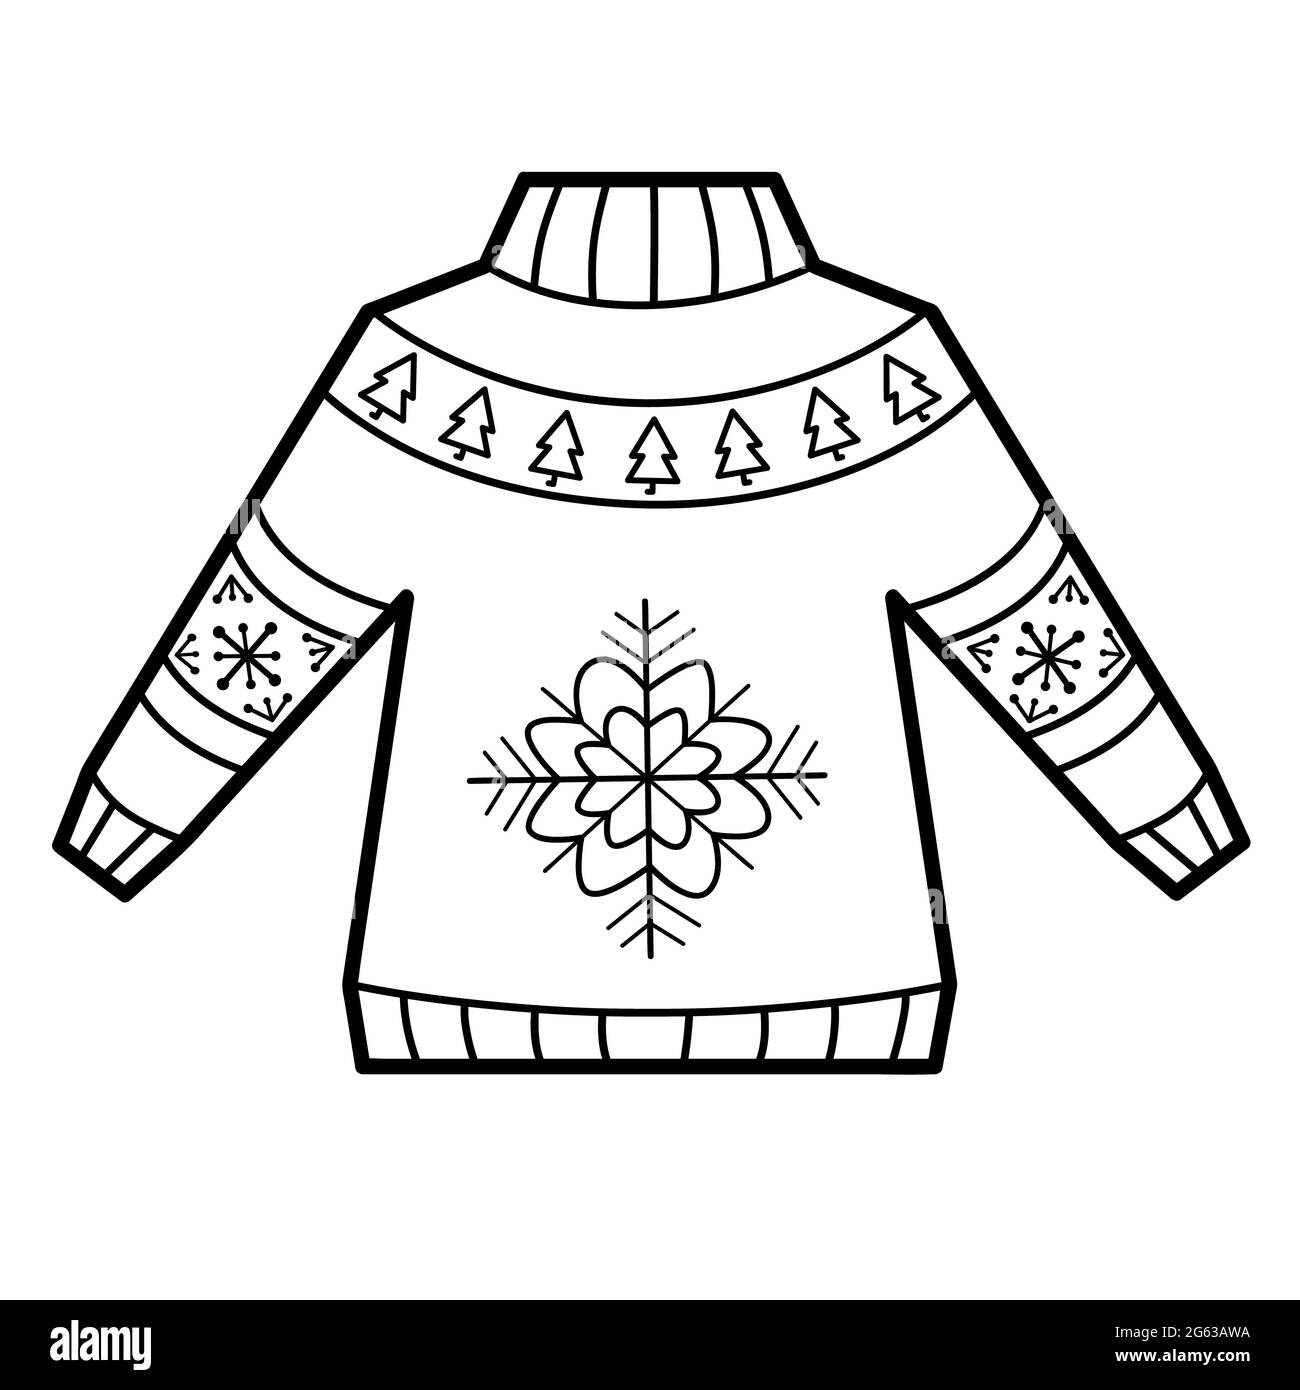 Christmas coloring book or page for kids. Sweater black and white  illustration Stock Photo - Alamy